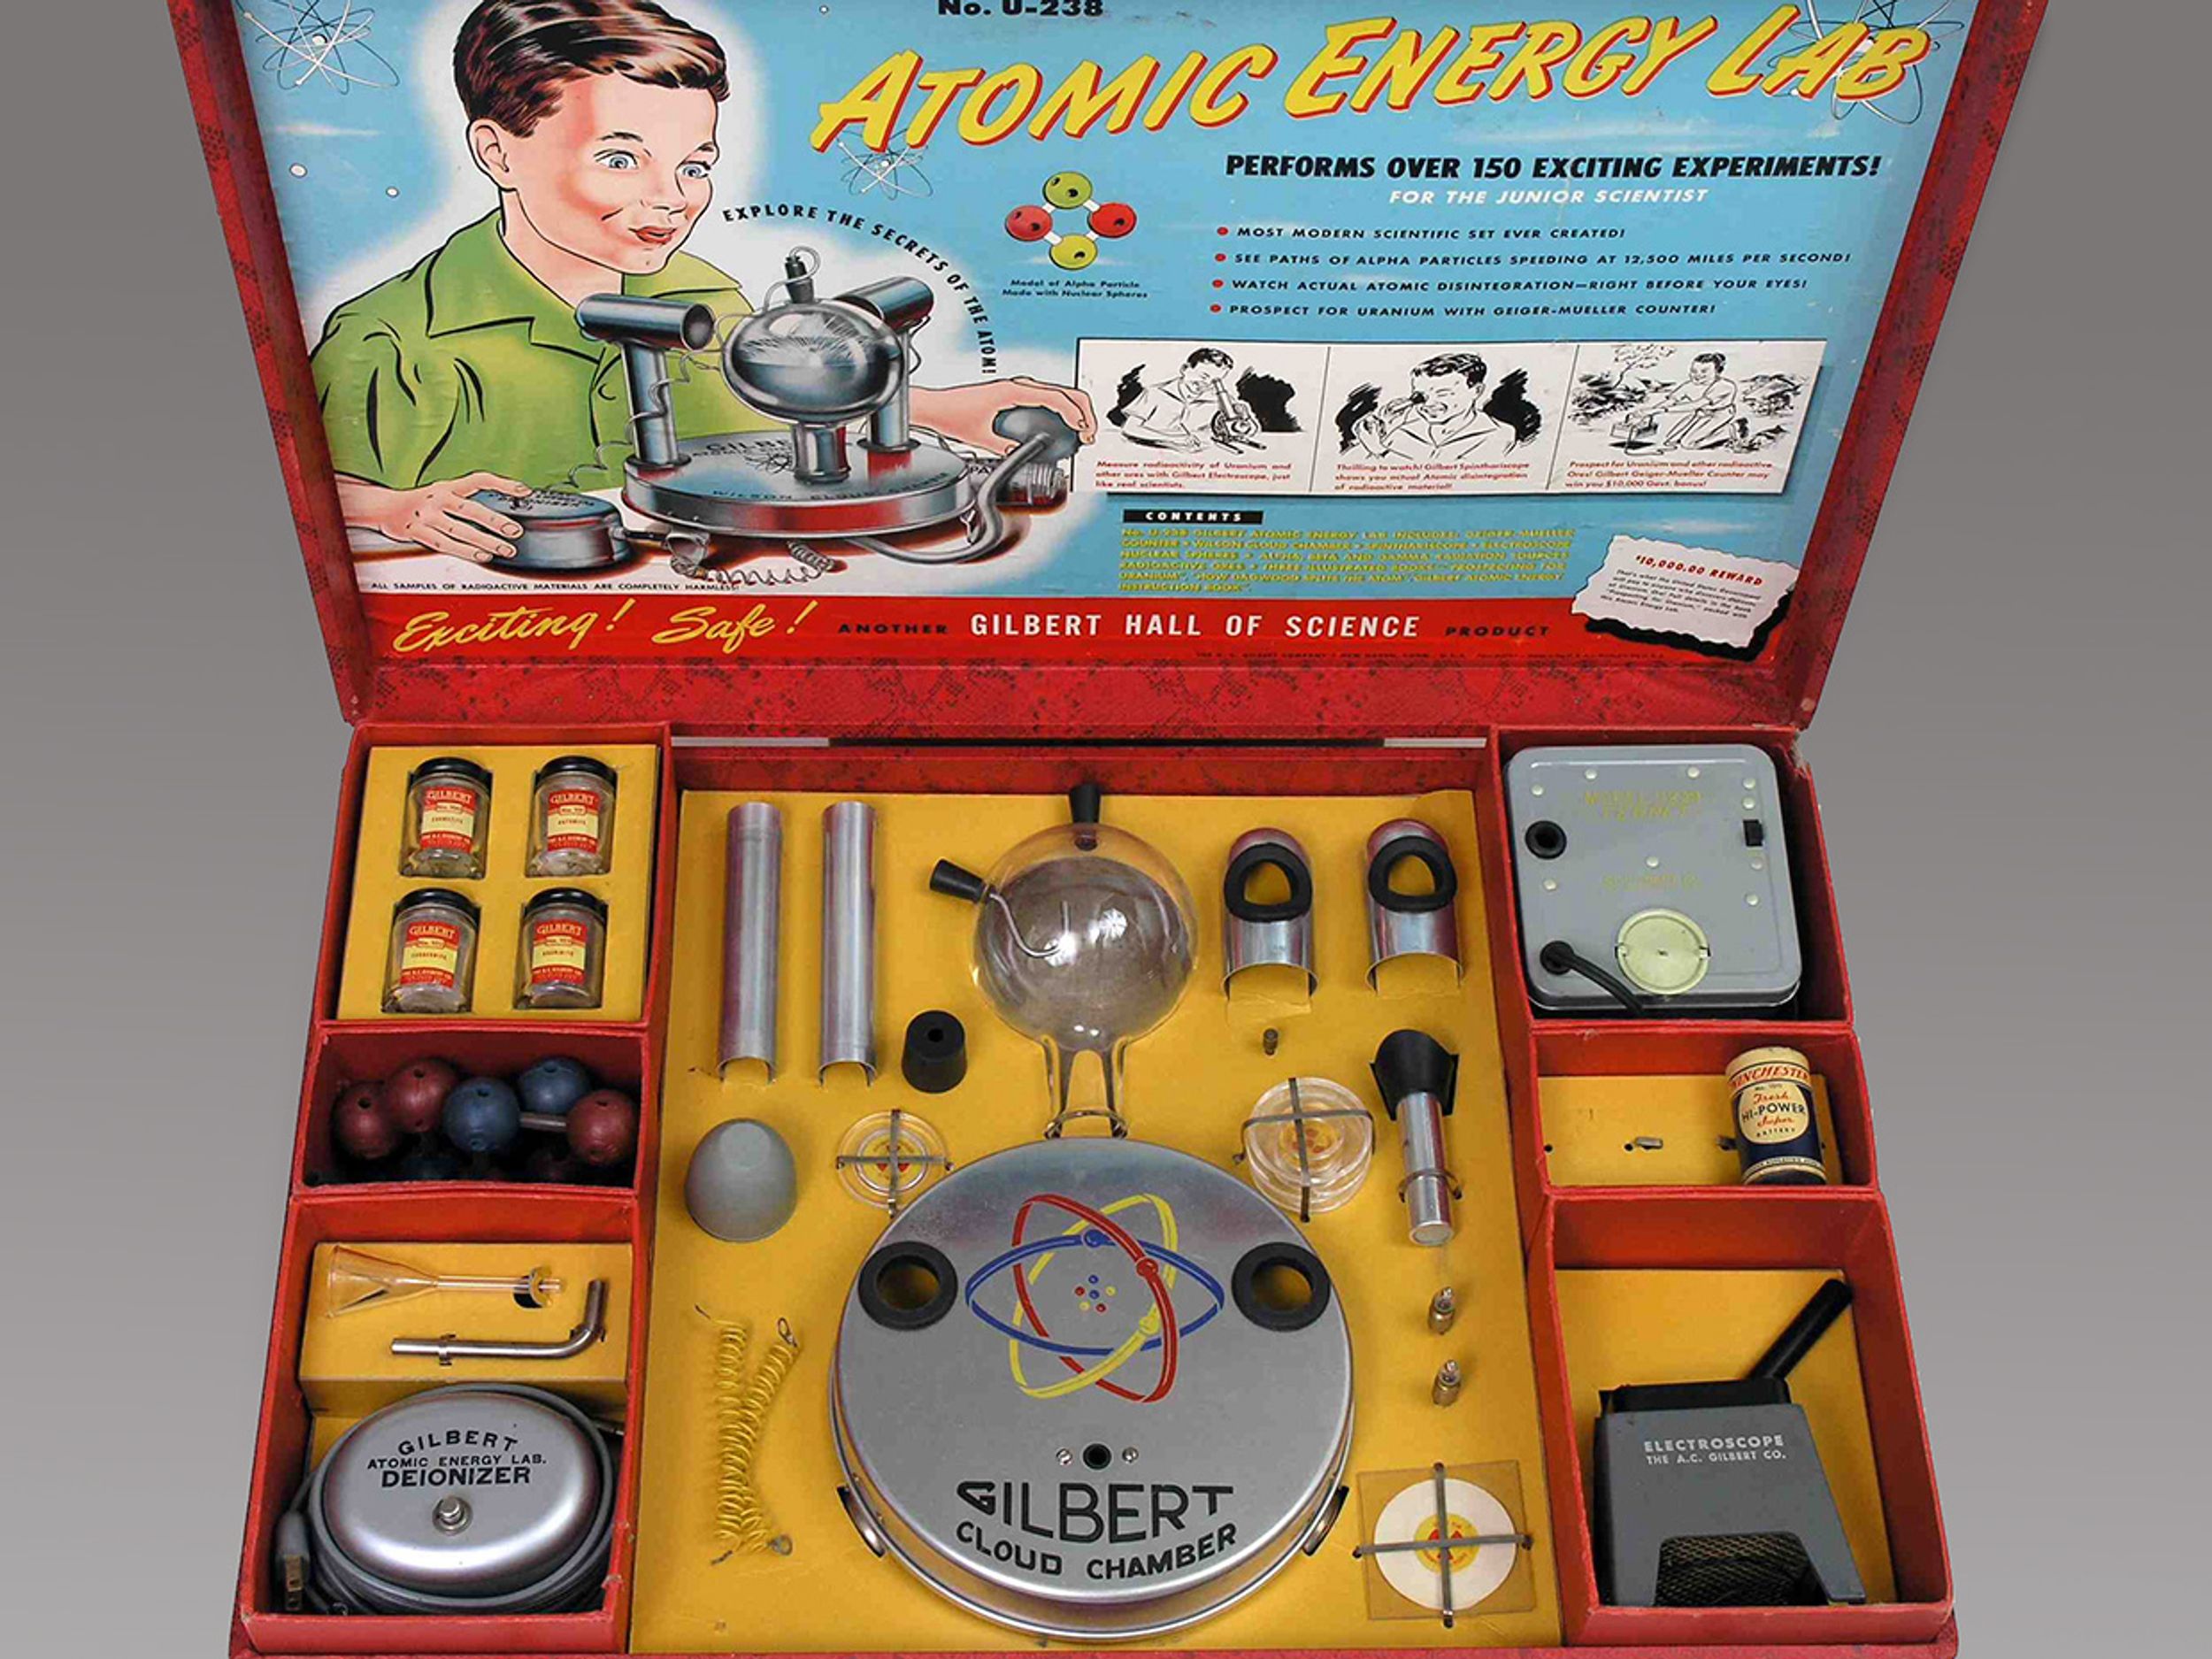 Overhead photo of the boxed "Atomic Energy Lab."